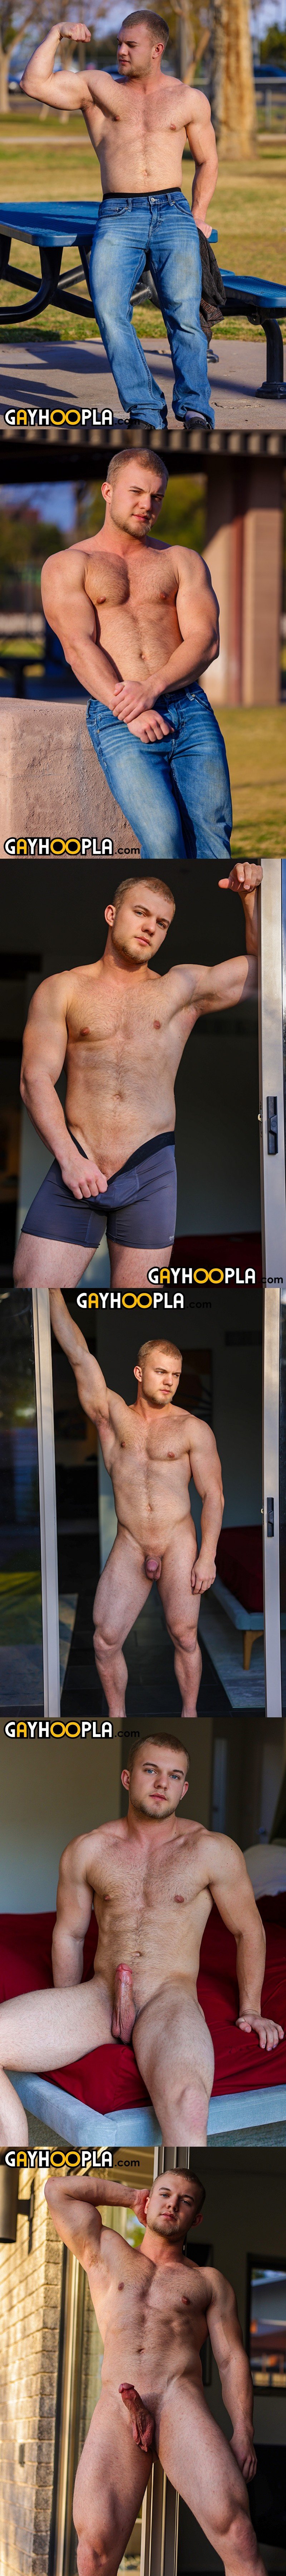 Site Review: Gay Hoopla